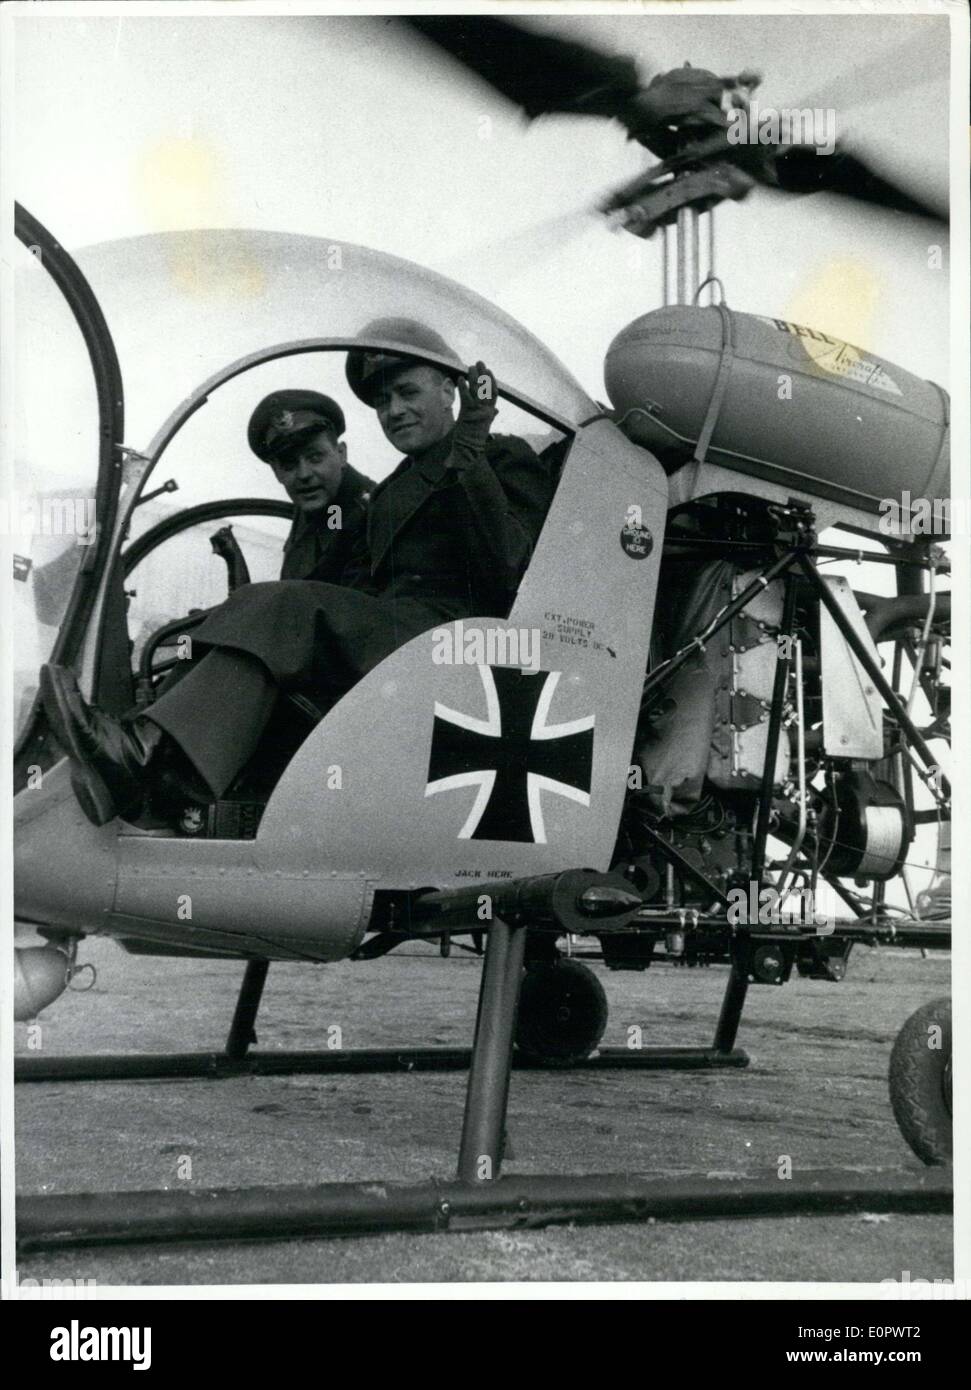 Jan. 09, 1957 - Pictured here is the first helicopter, a Type Bell 47, of the German Armed Forces in Anderbach. Mr. Bender and Mr. Drebing are shown during its first flight. Stock Photo